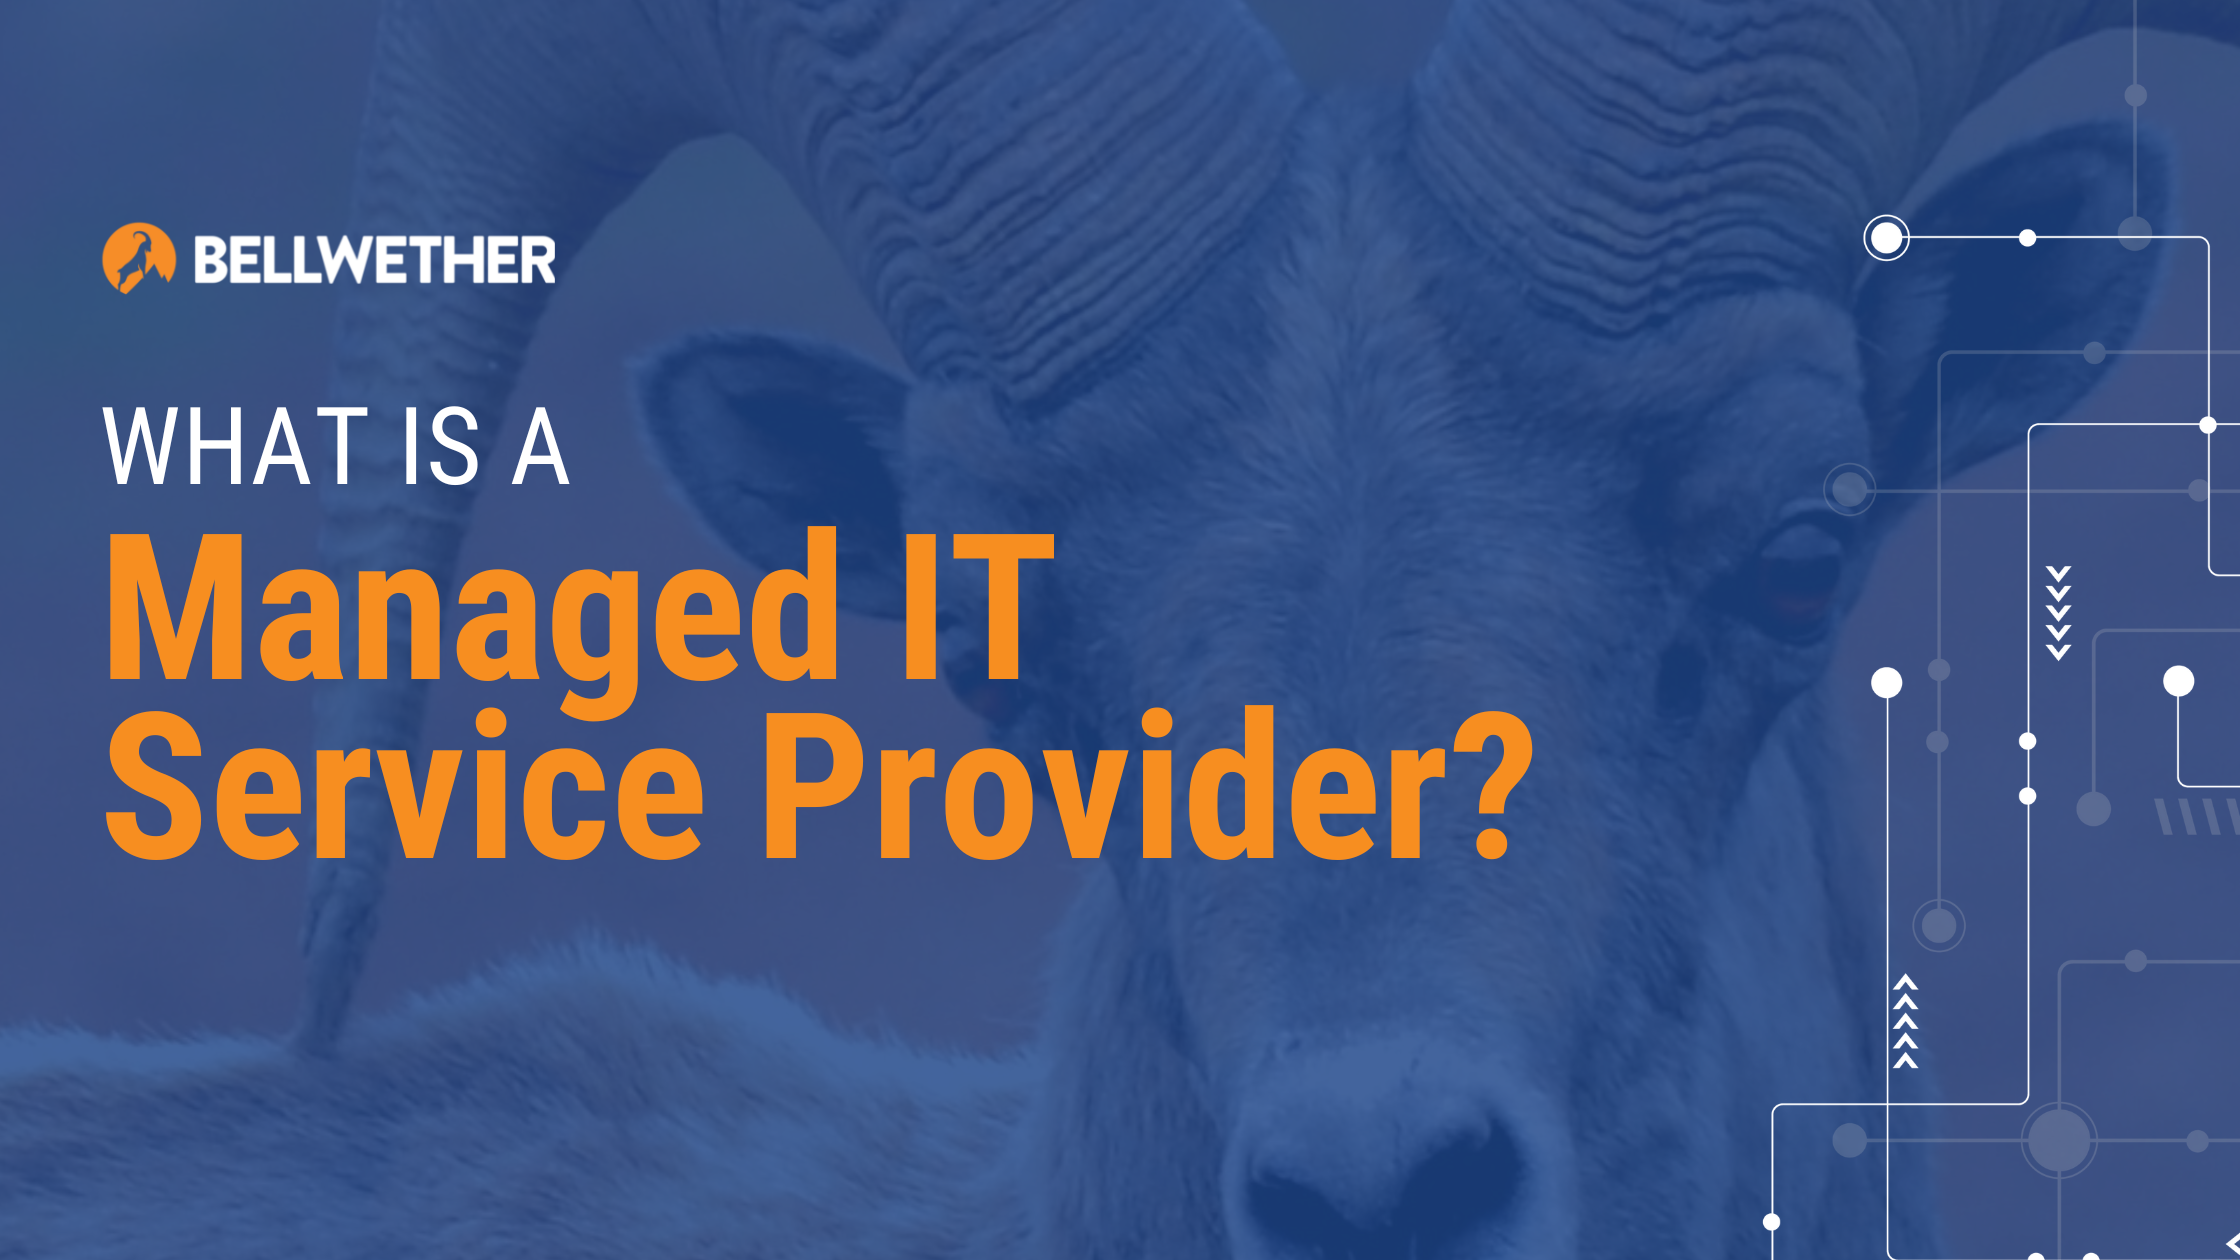 What is a managed IT service provider?